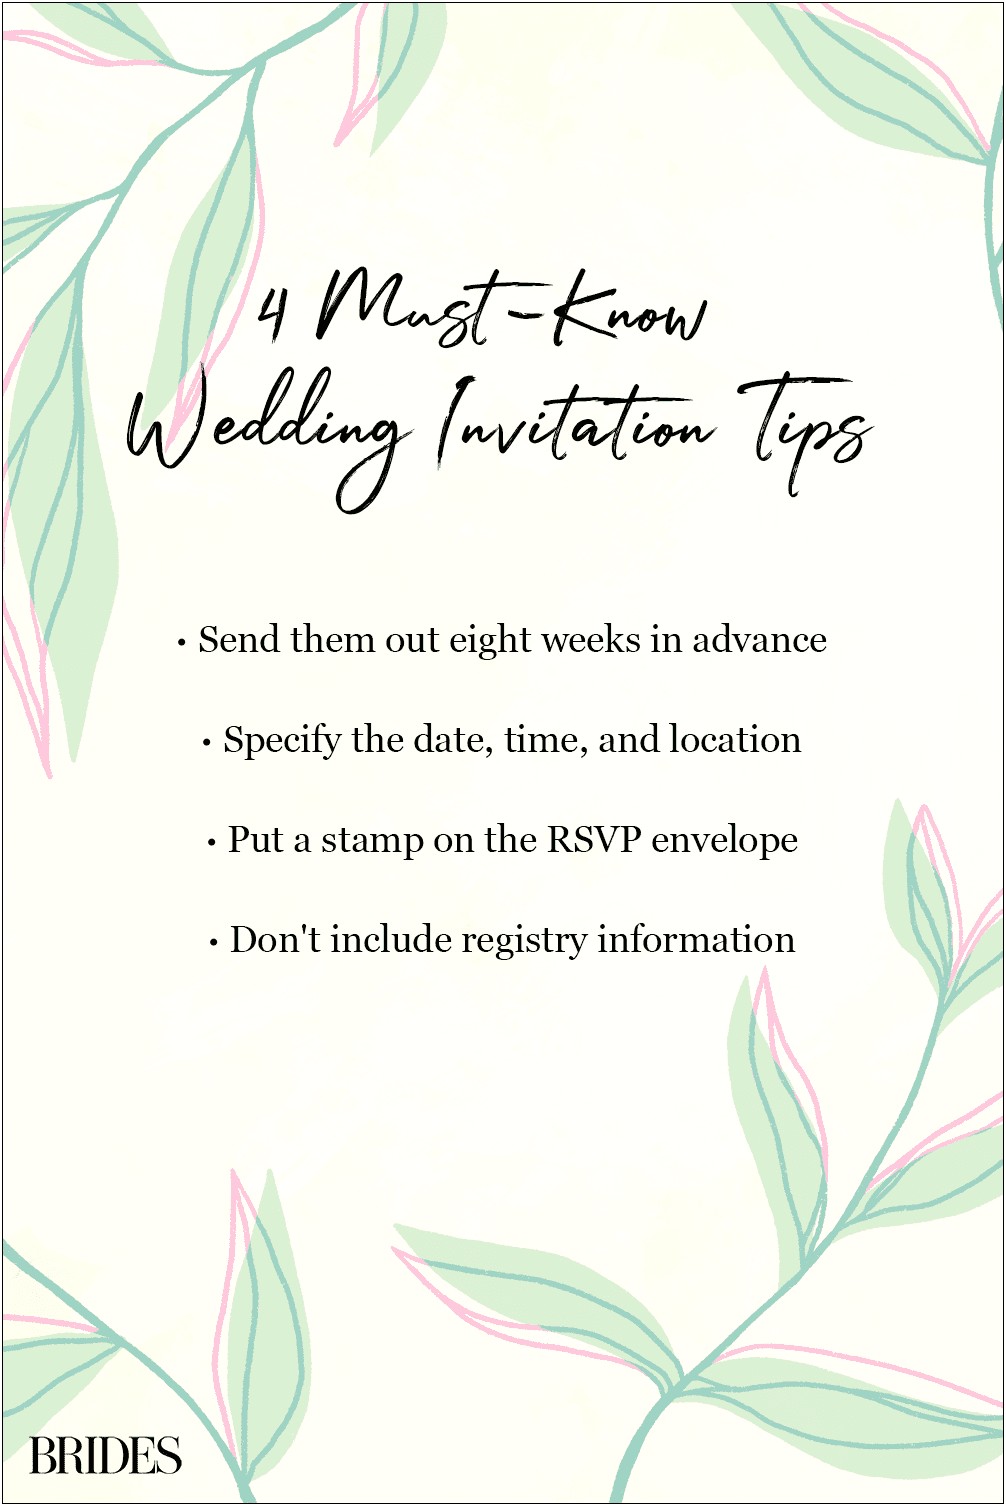 Who Should Wedding Invitations Be Sent From